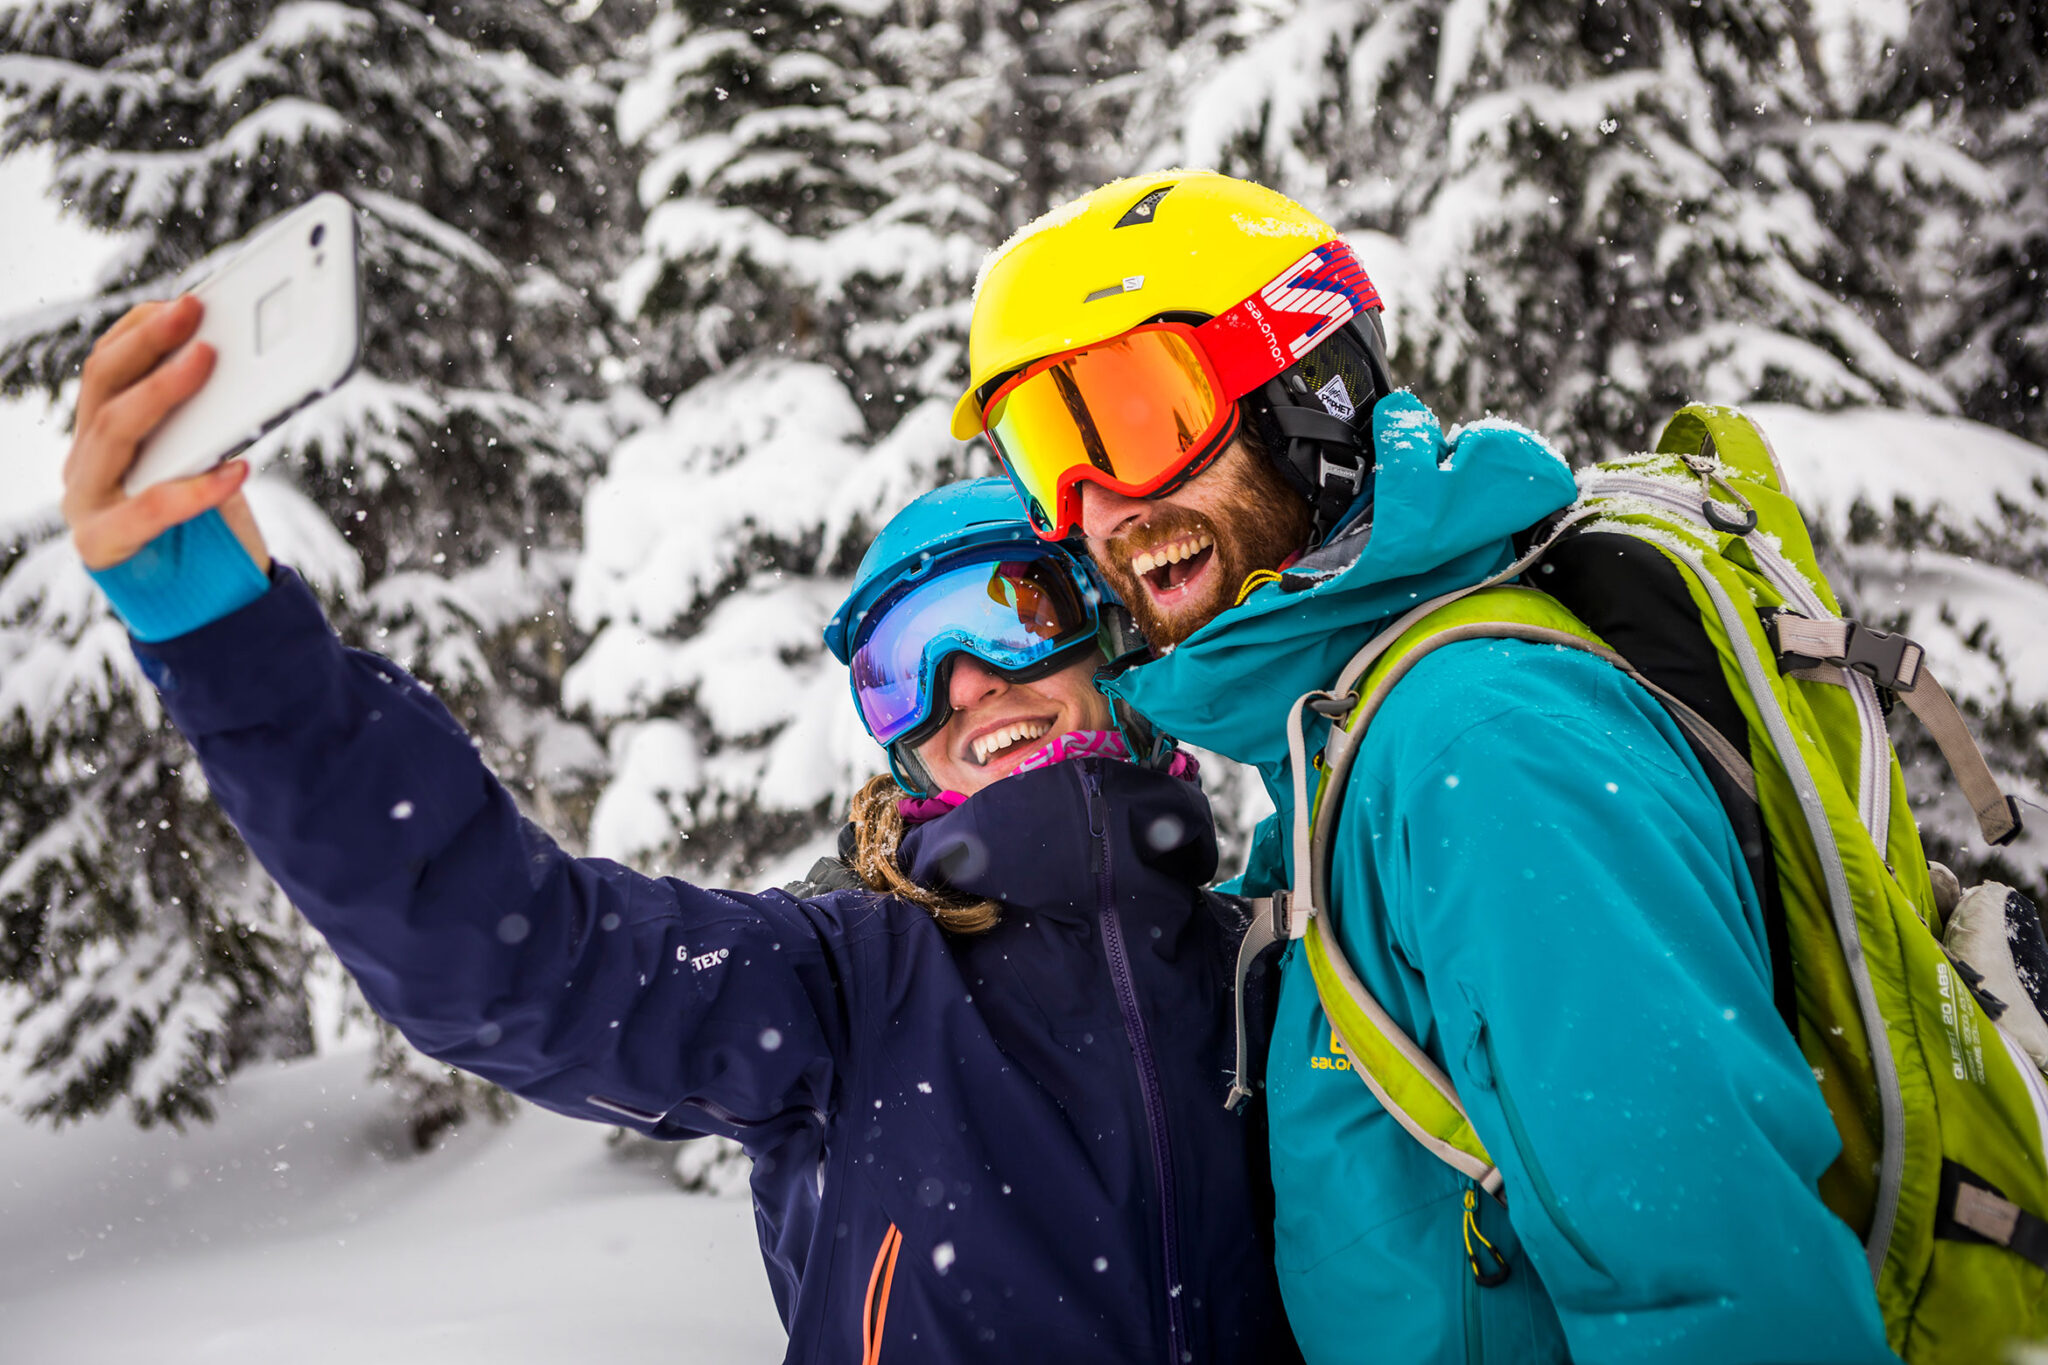 A couple take a selfie in the snow while skiing on Whistler Blackcomb.